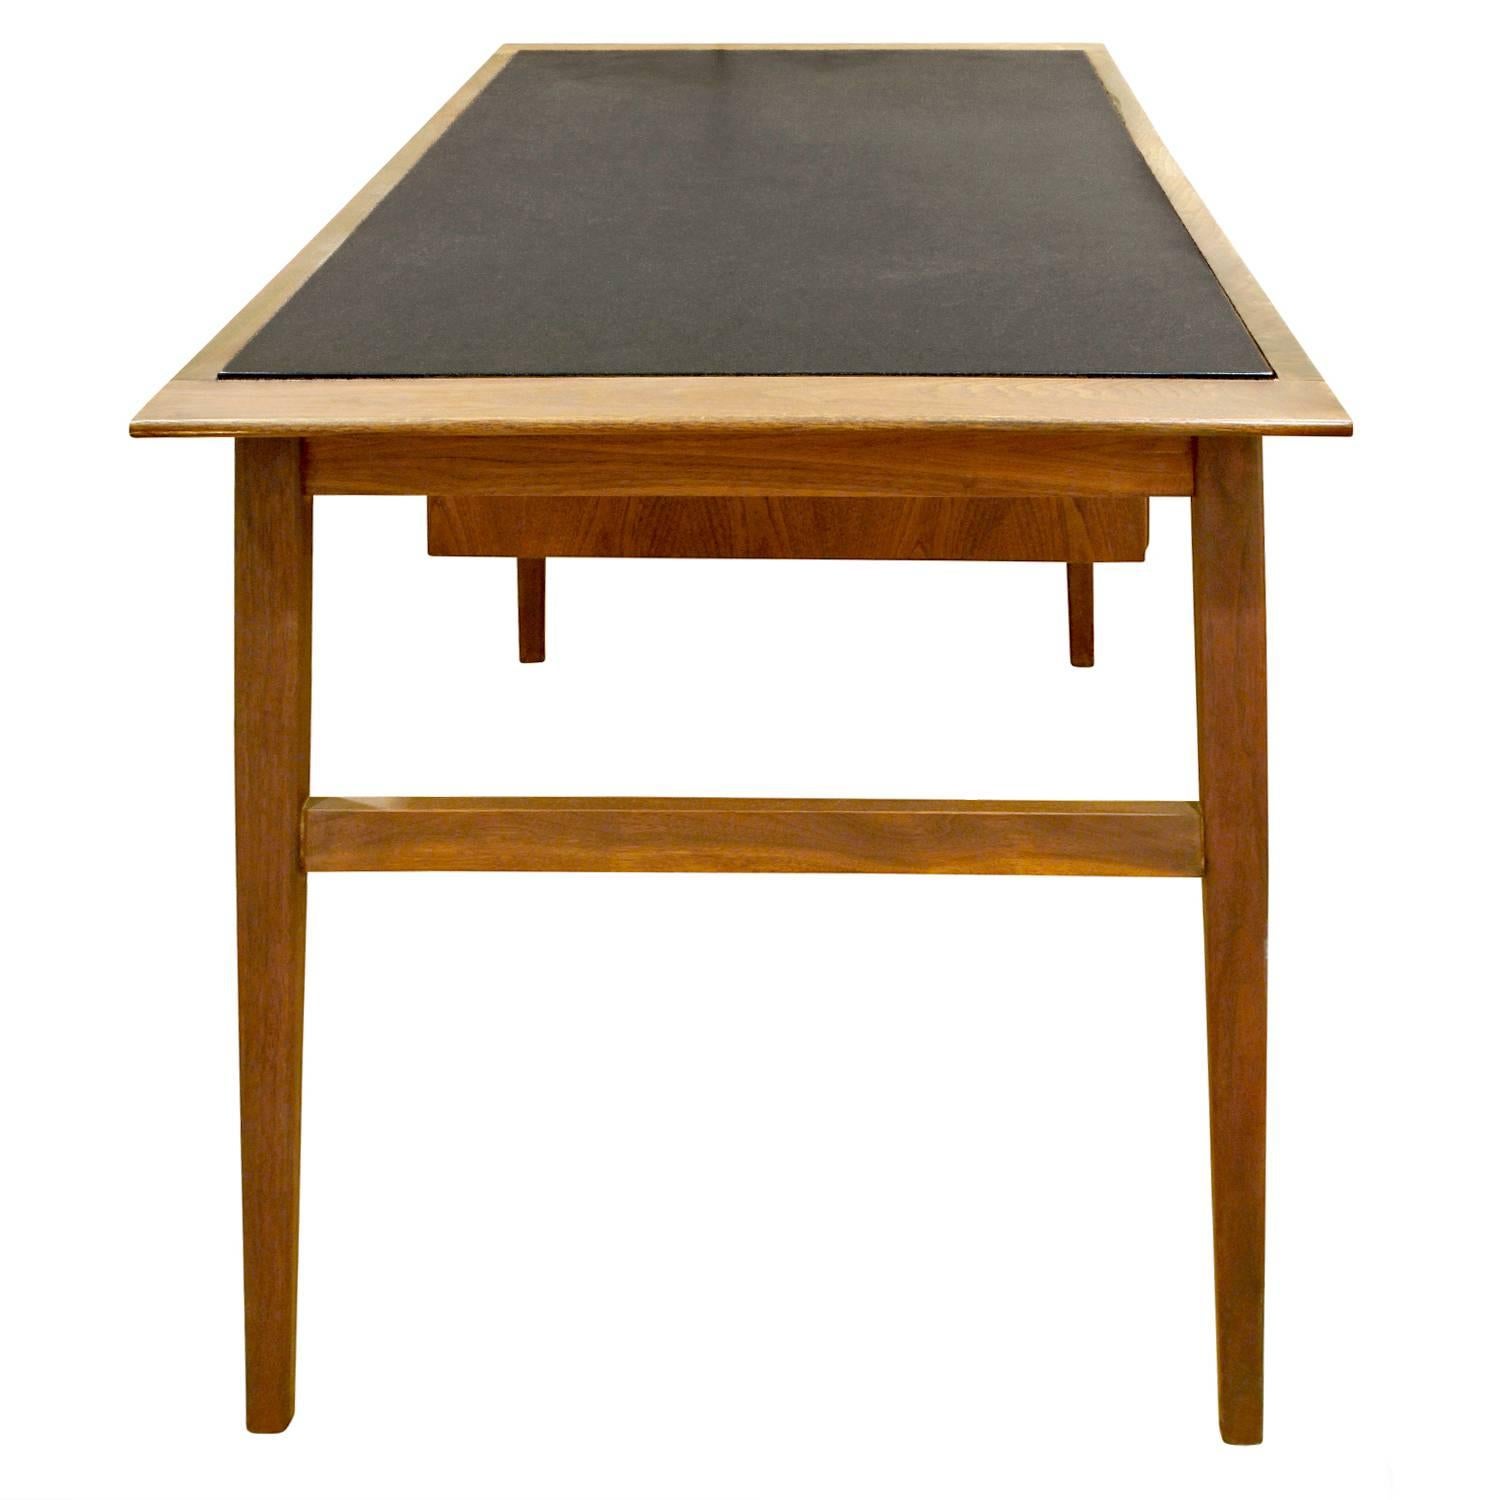 Hand-Crafted Danish Desk with Micarta Top, 1960s